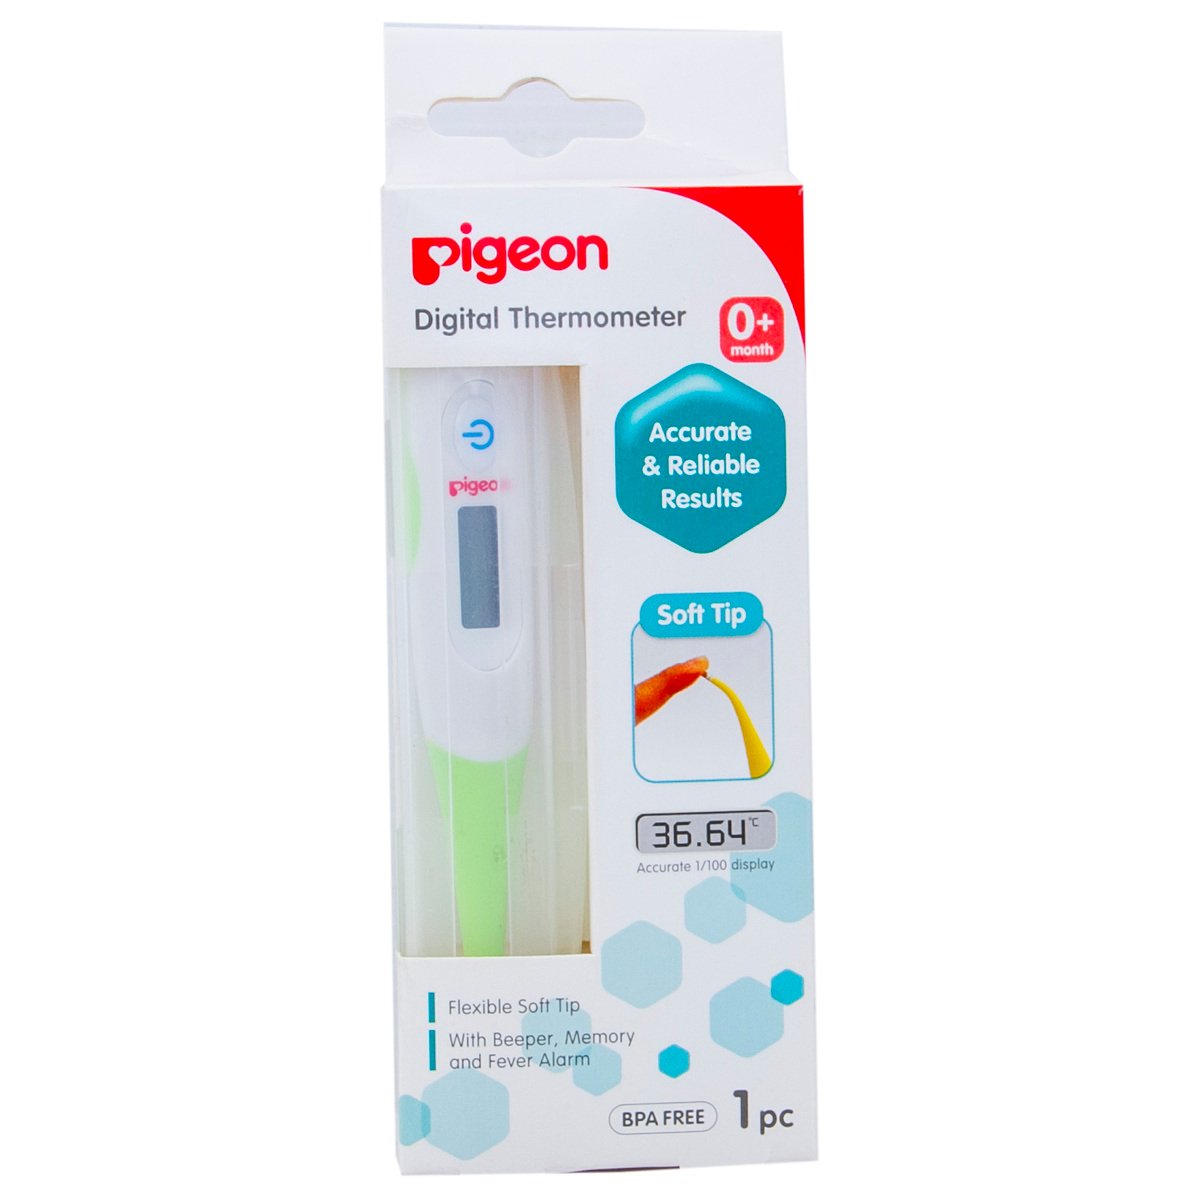 Pigeon Digital Thermometer 1 pc